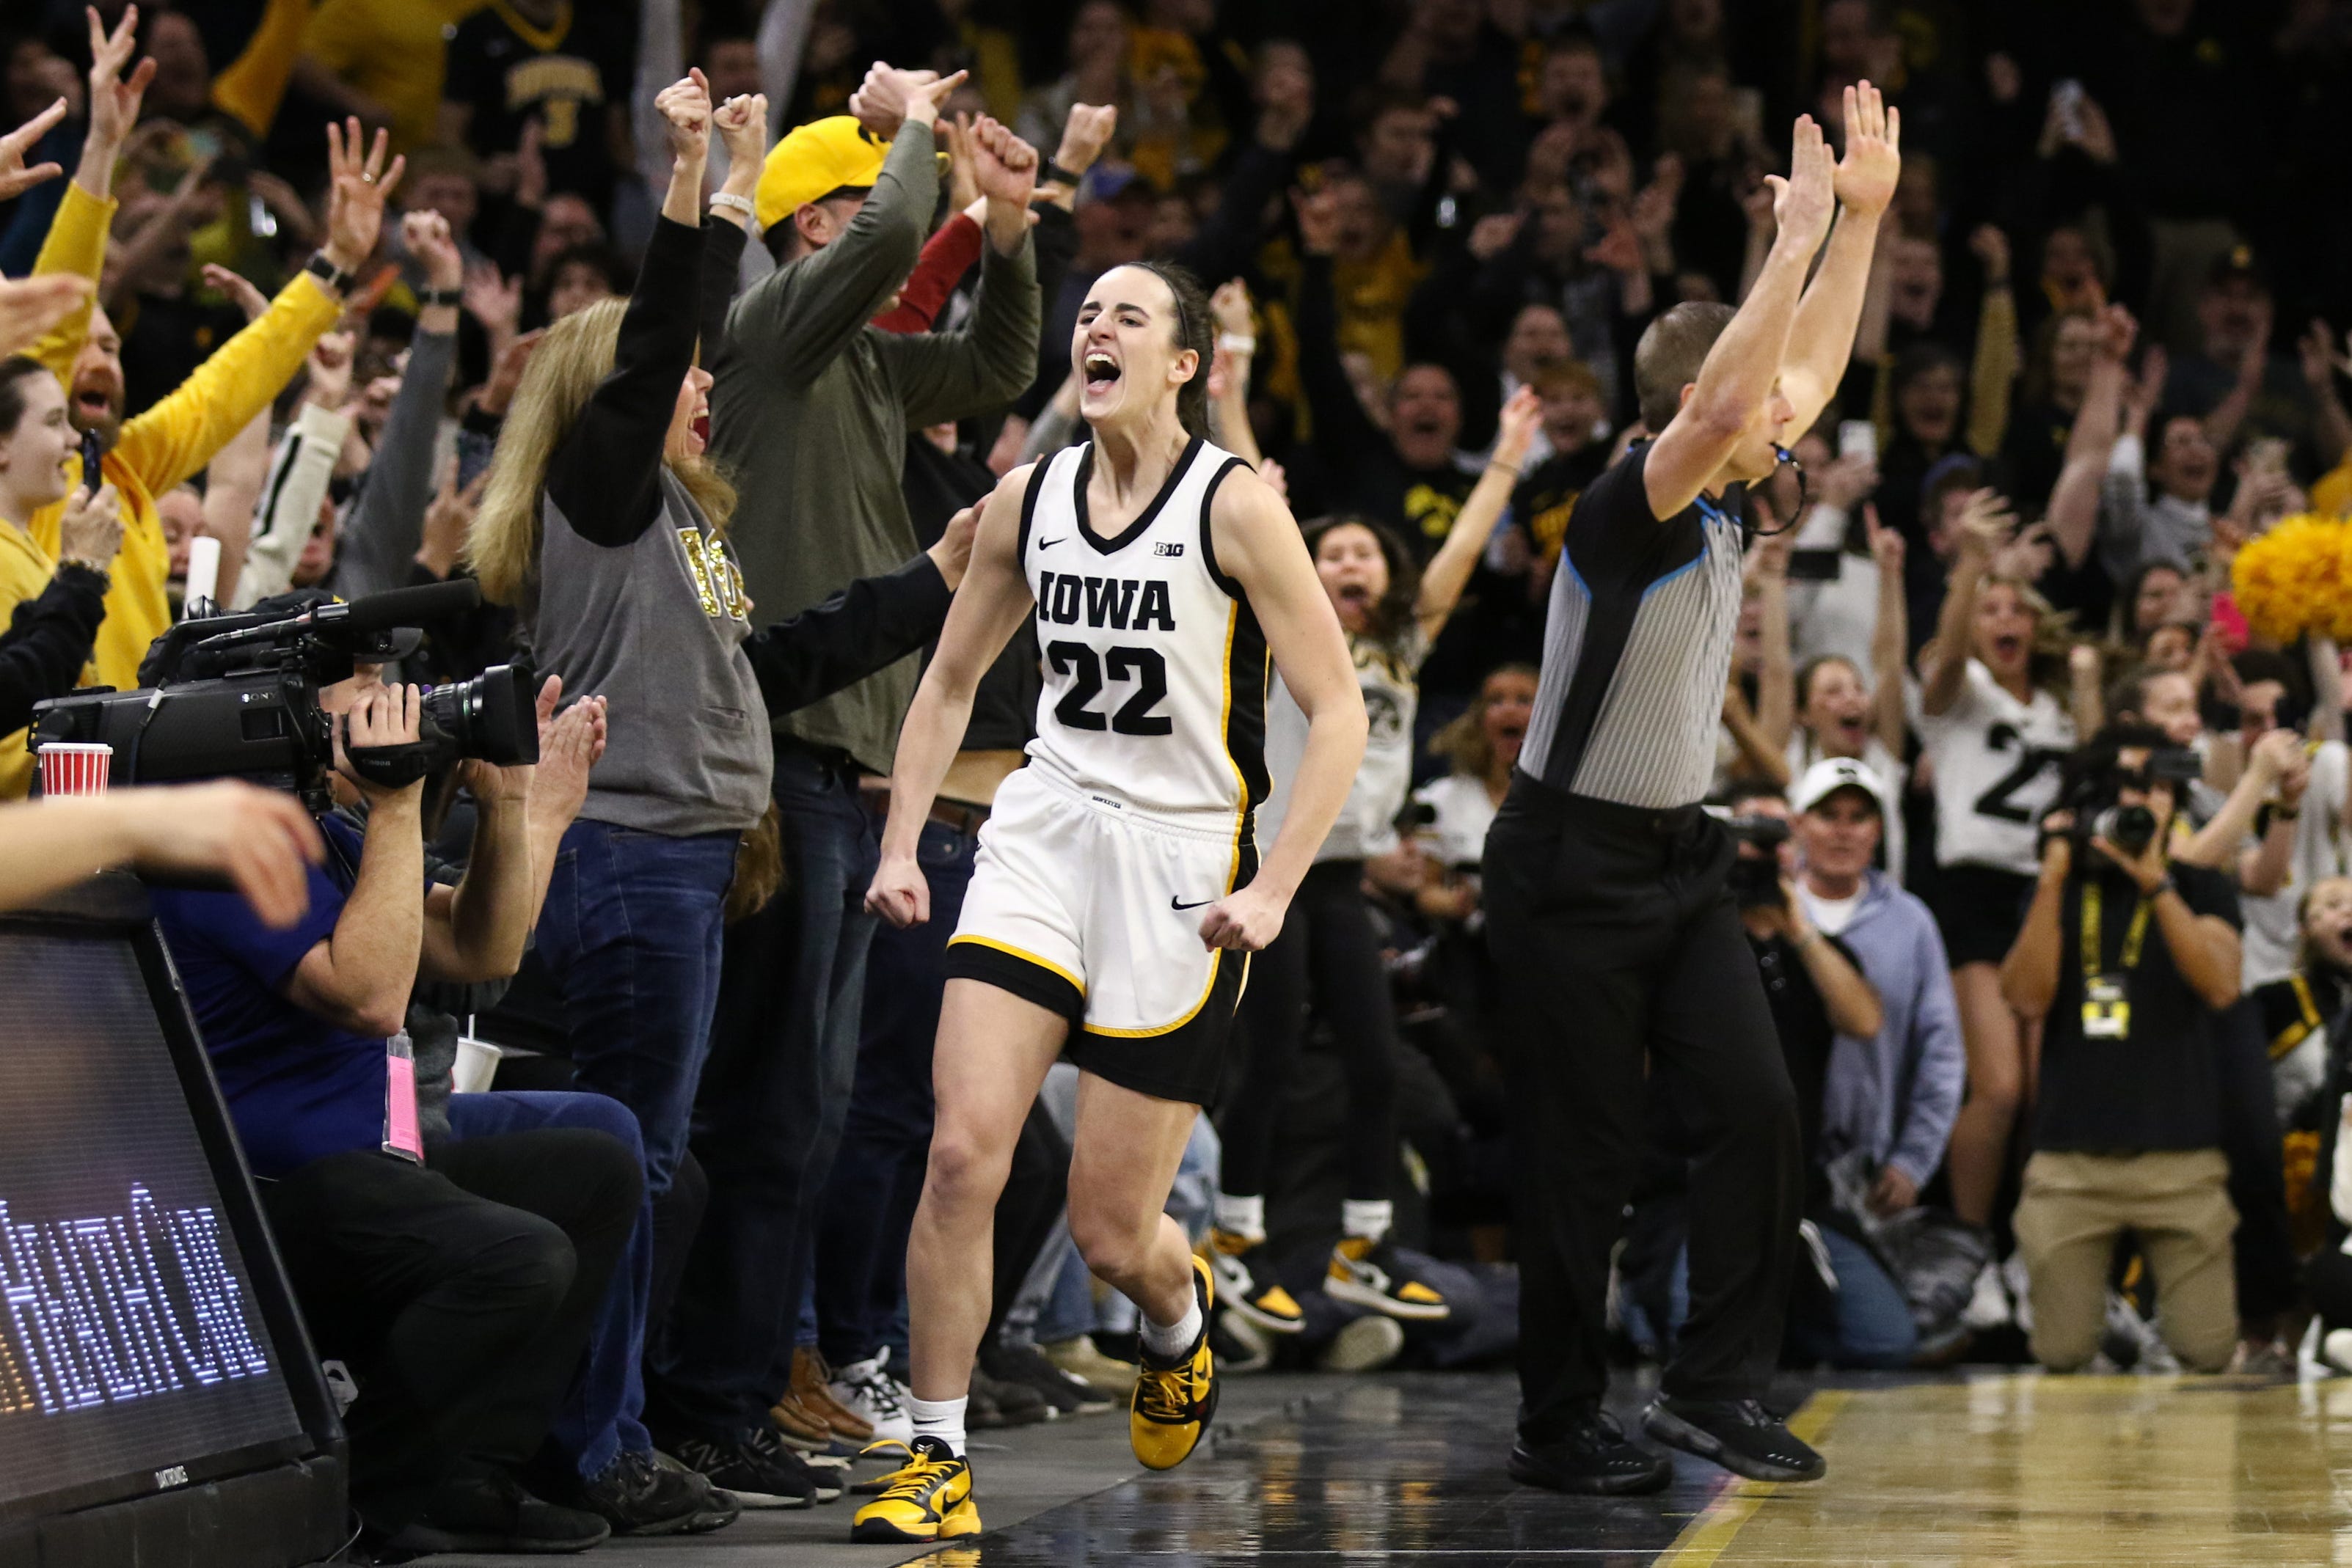 sue birds explains how caitlin clark can separate herself in the wnba and become an all-star